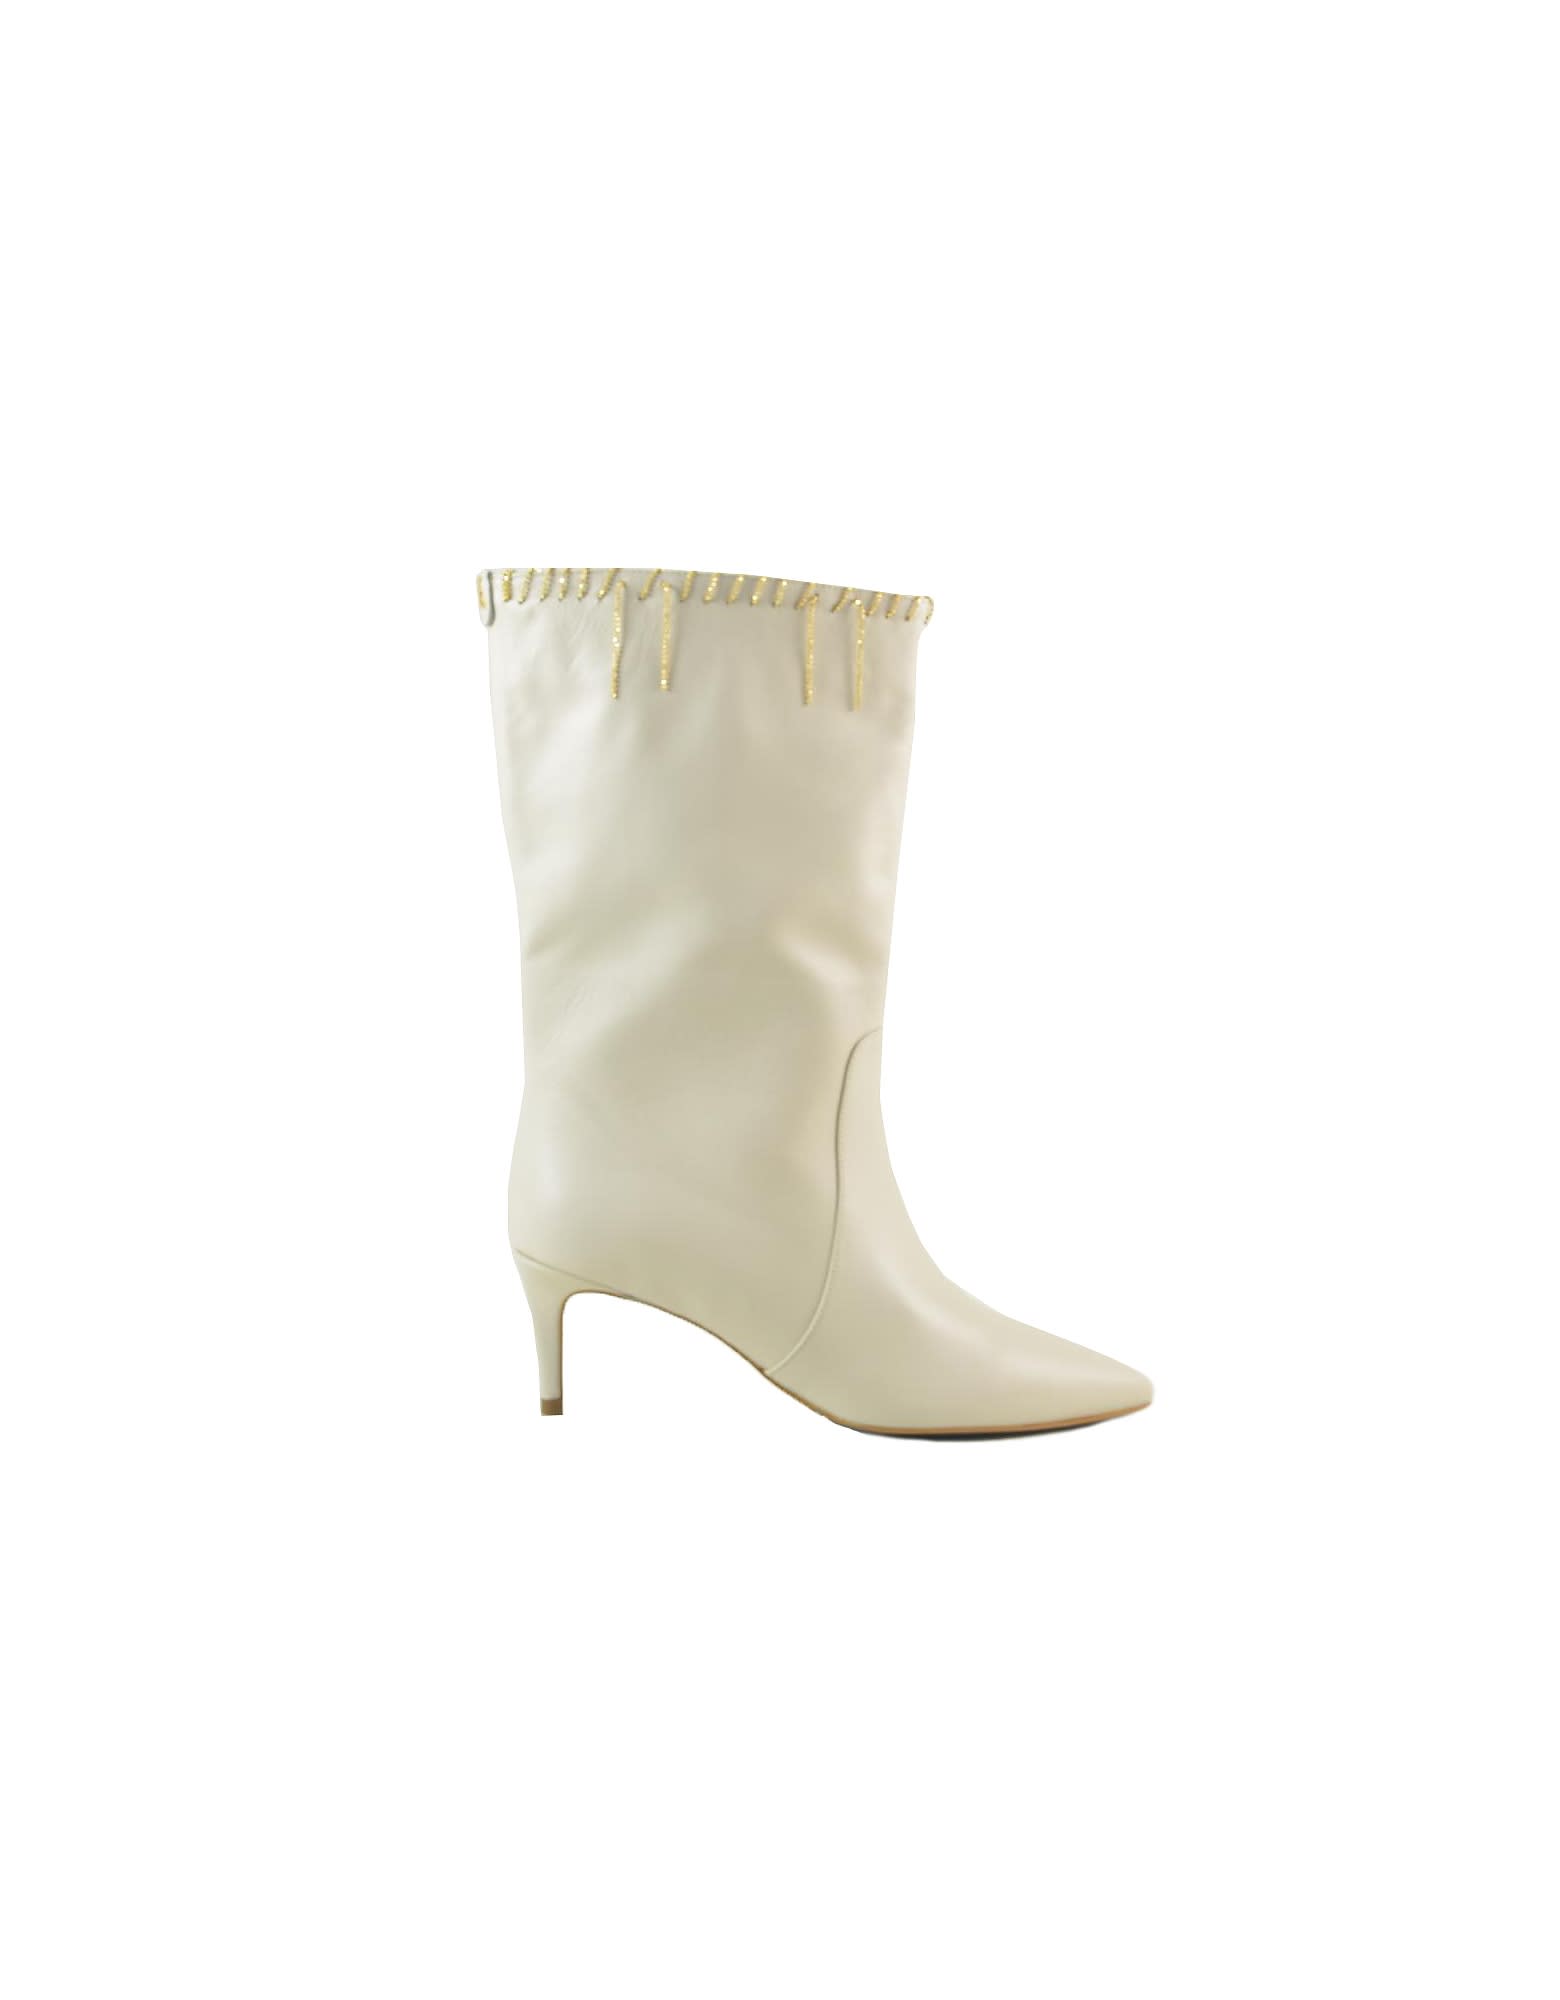 Patrizia Pepe Ivory Leather Boots W/chains